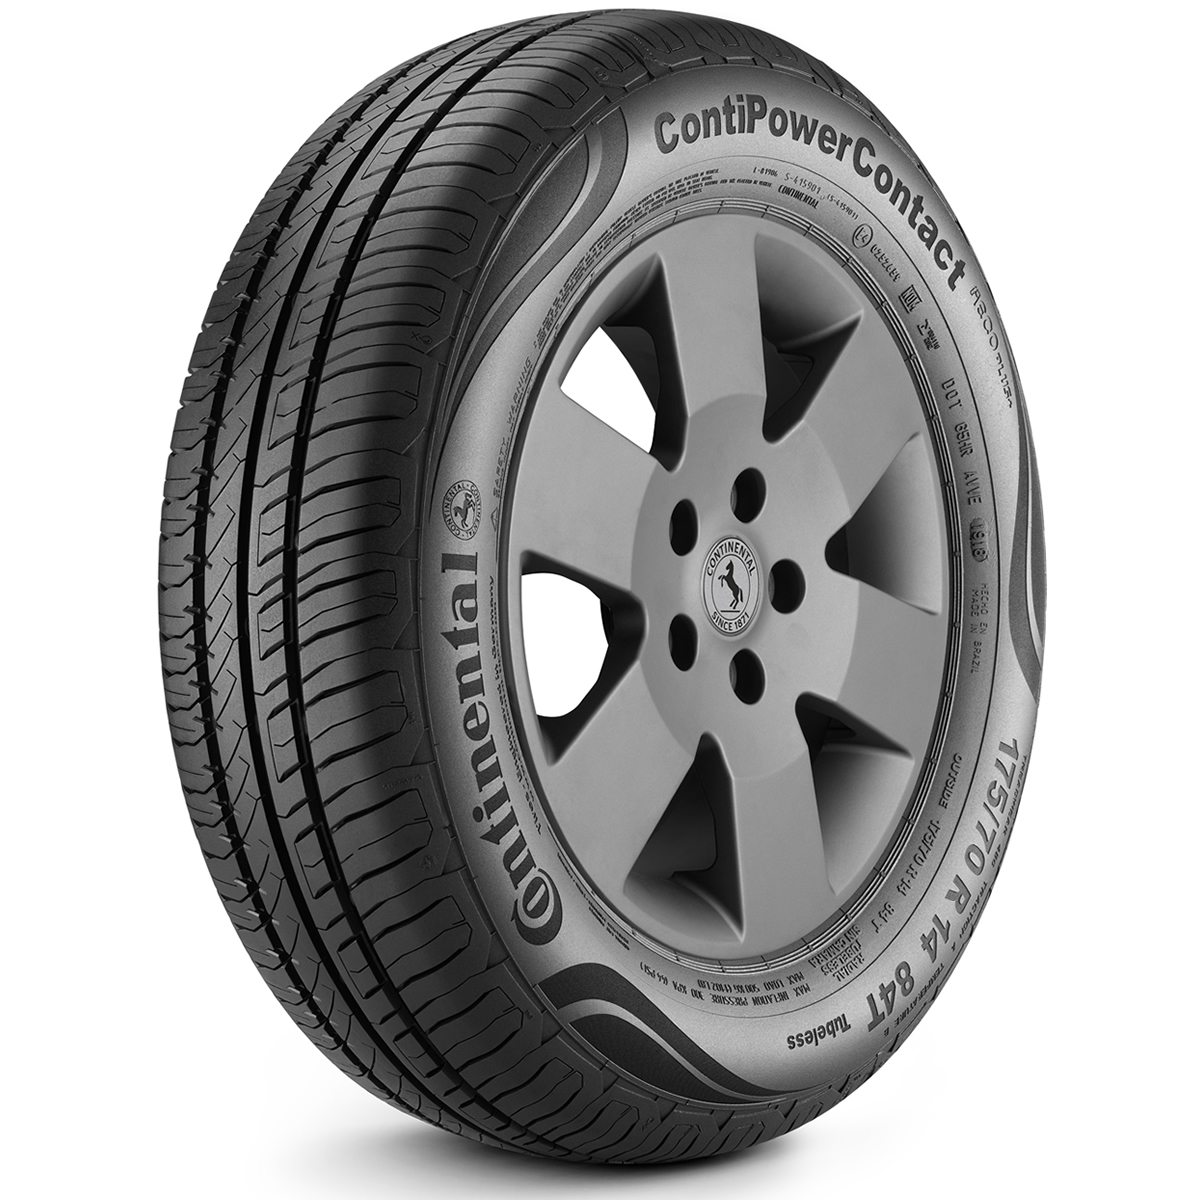 175/65R14 CONTIPOWERCONTACT 82T CONTI                       